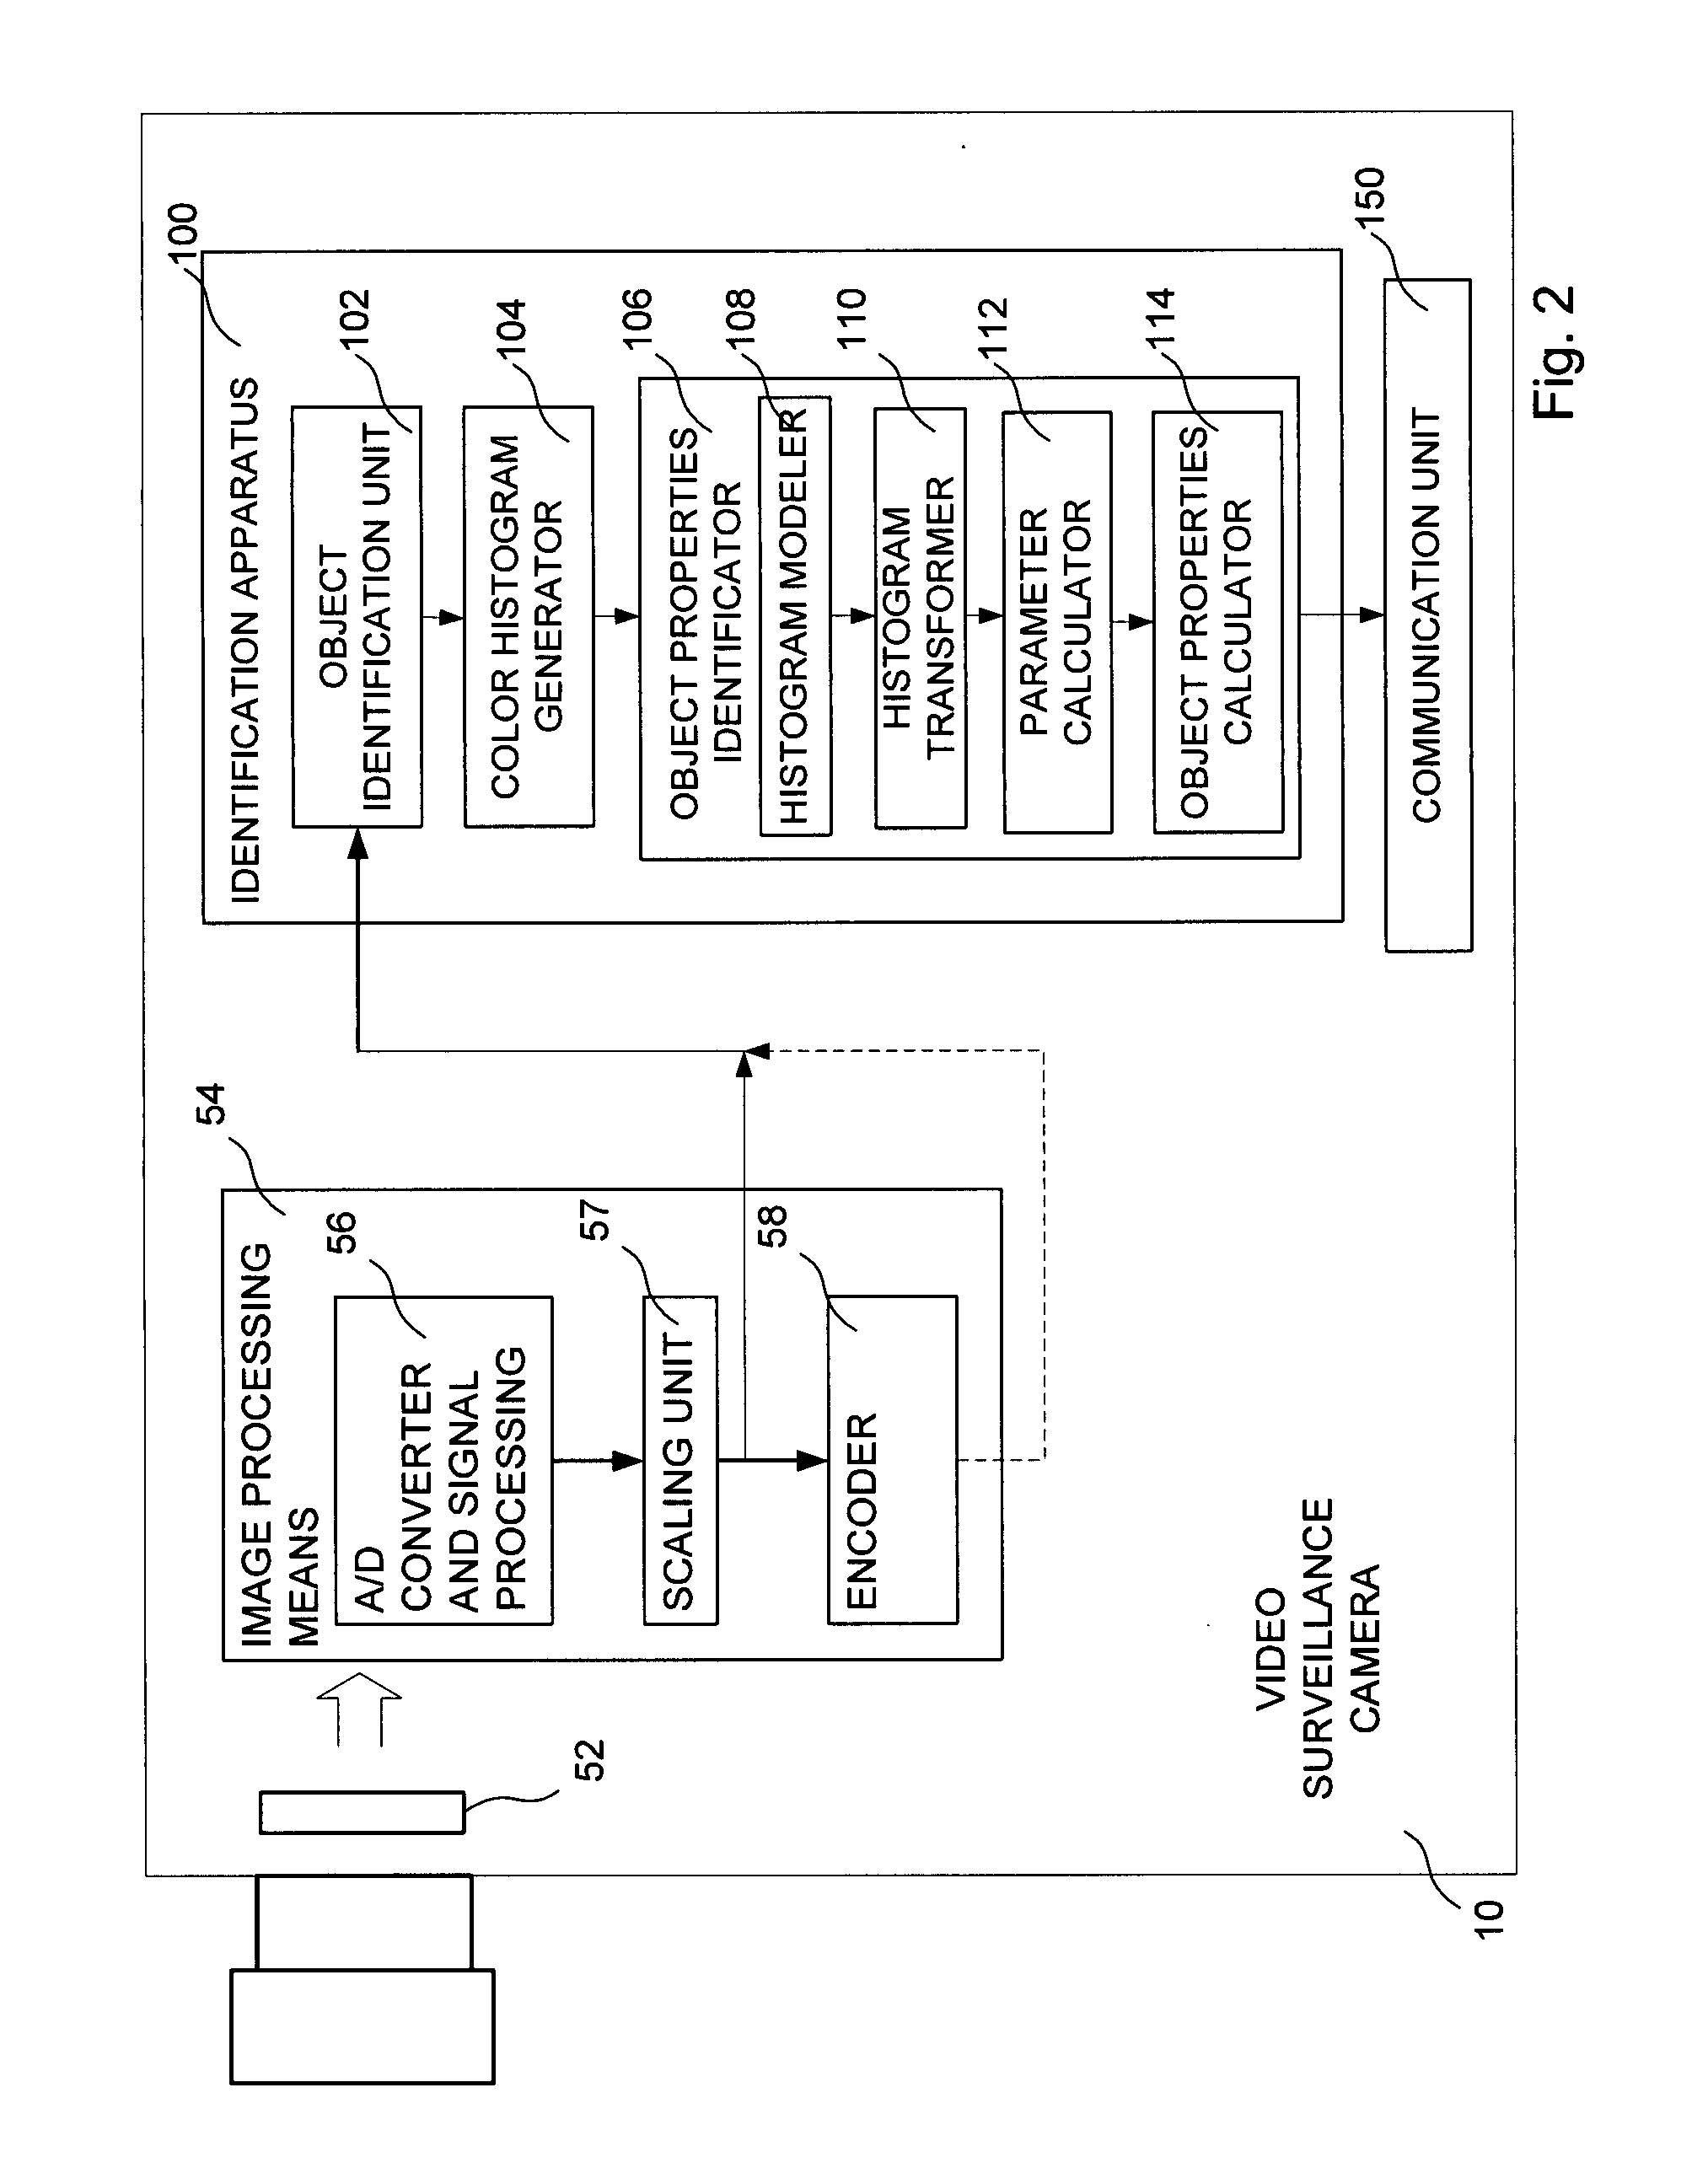 Identification apparatus and method for identifying properties of an object detected by a video surveillance camera